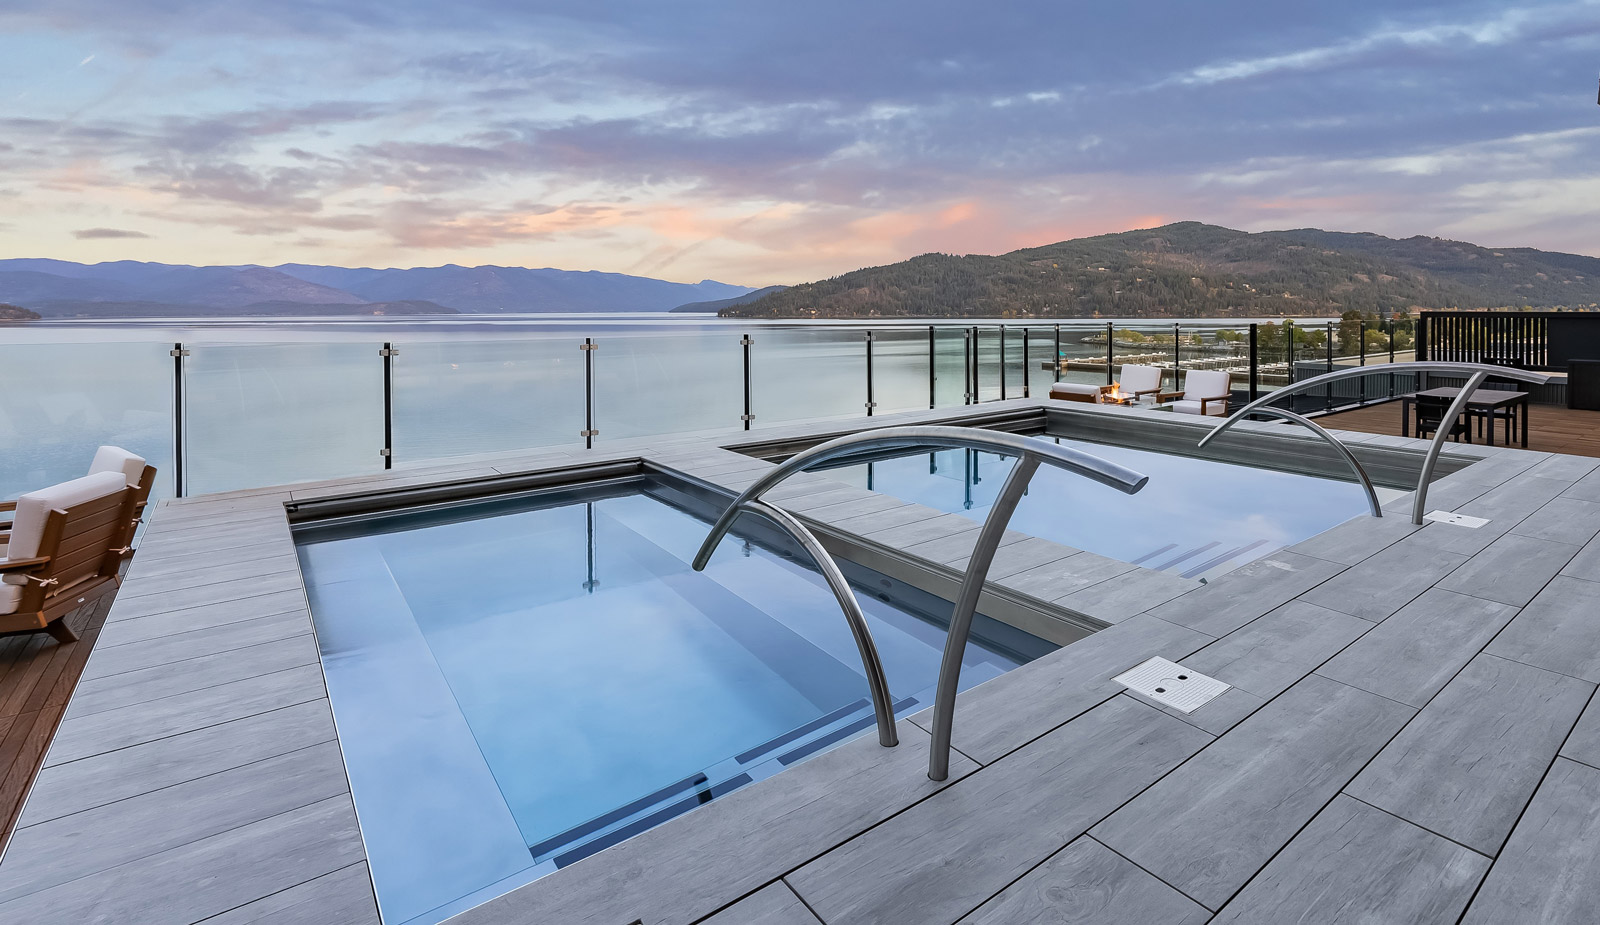 Rooftop stainless steel pool and spa with automatic cover and LED lighting.  Both pool and spa have interior descending stairways and bench seating.  179”x330”x48”